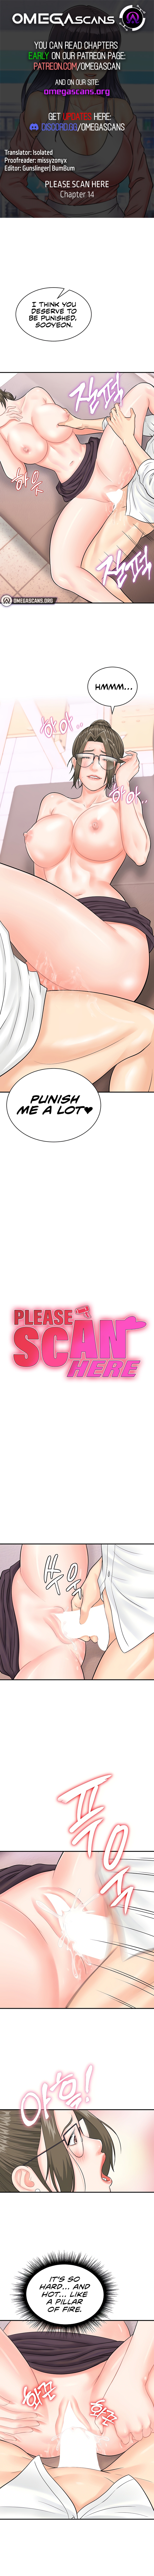 Please Scan Here NEW image